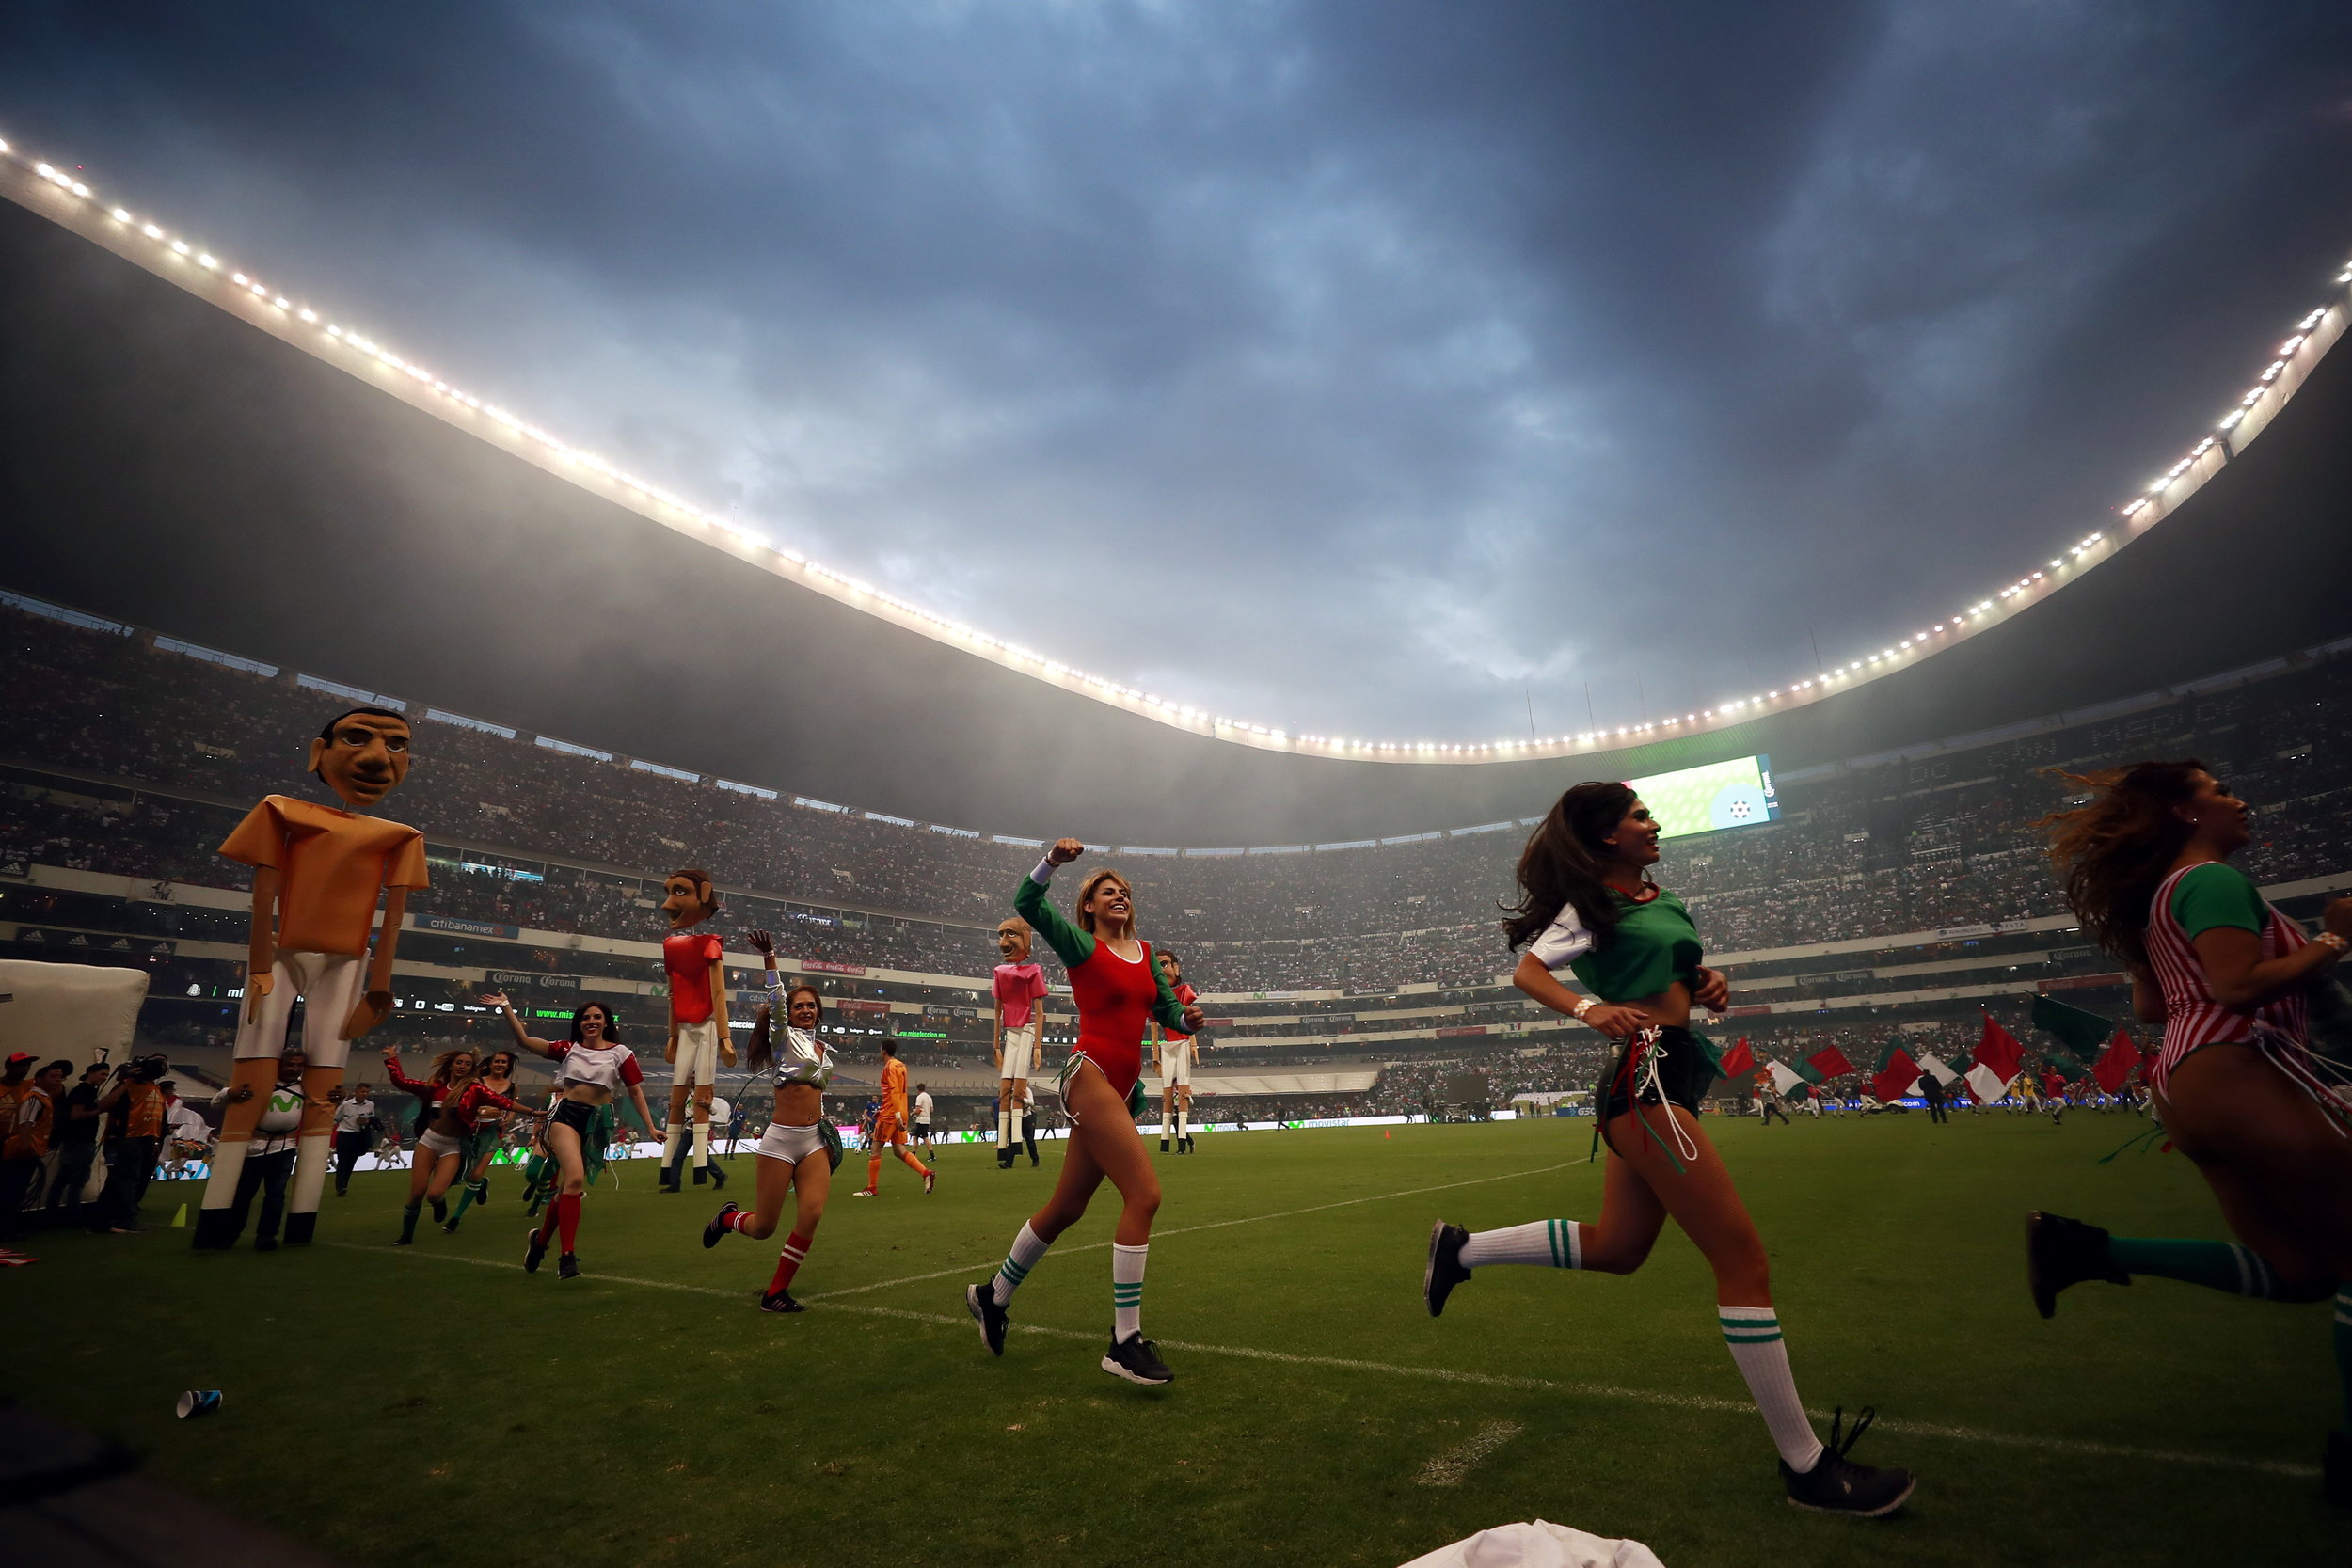 epa06781723 Cheerleaders perform at halftime during the friendly match between Mexico and Scotland, held at the Azteca Stadium in Mexico City, Mexico, 02 June 2018.  EPA/JORGE NUNEZ